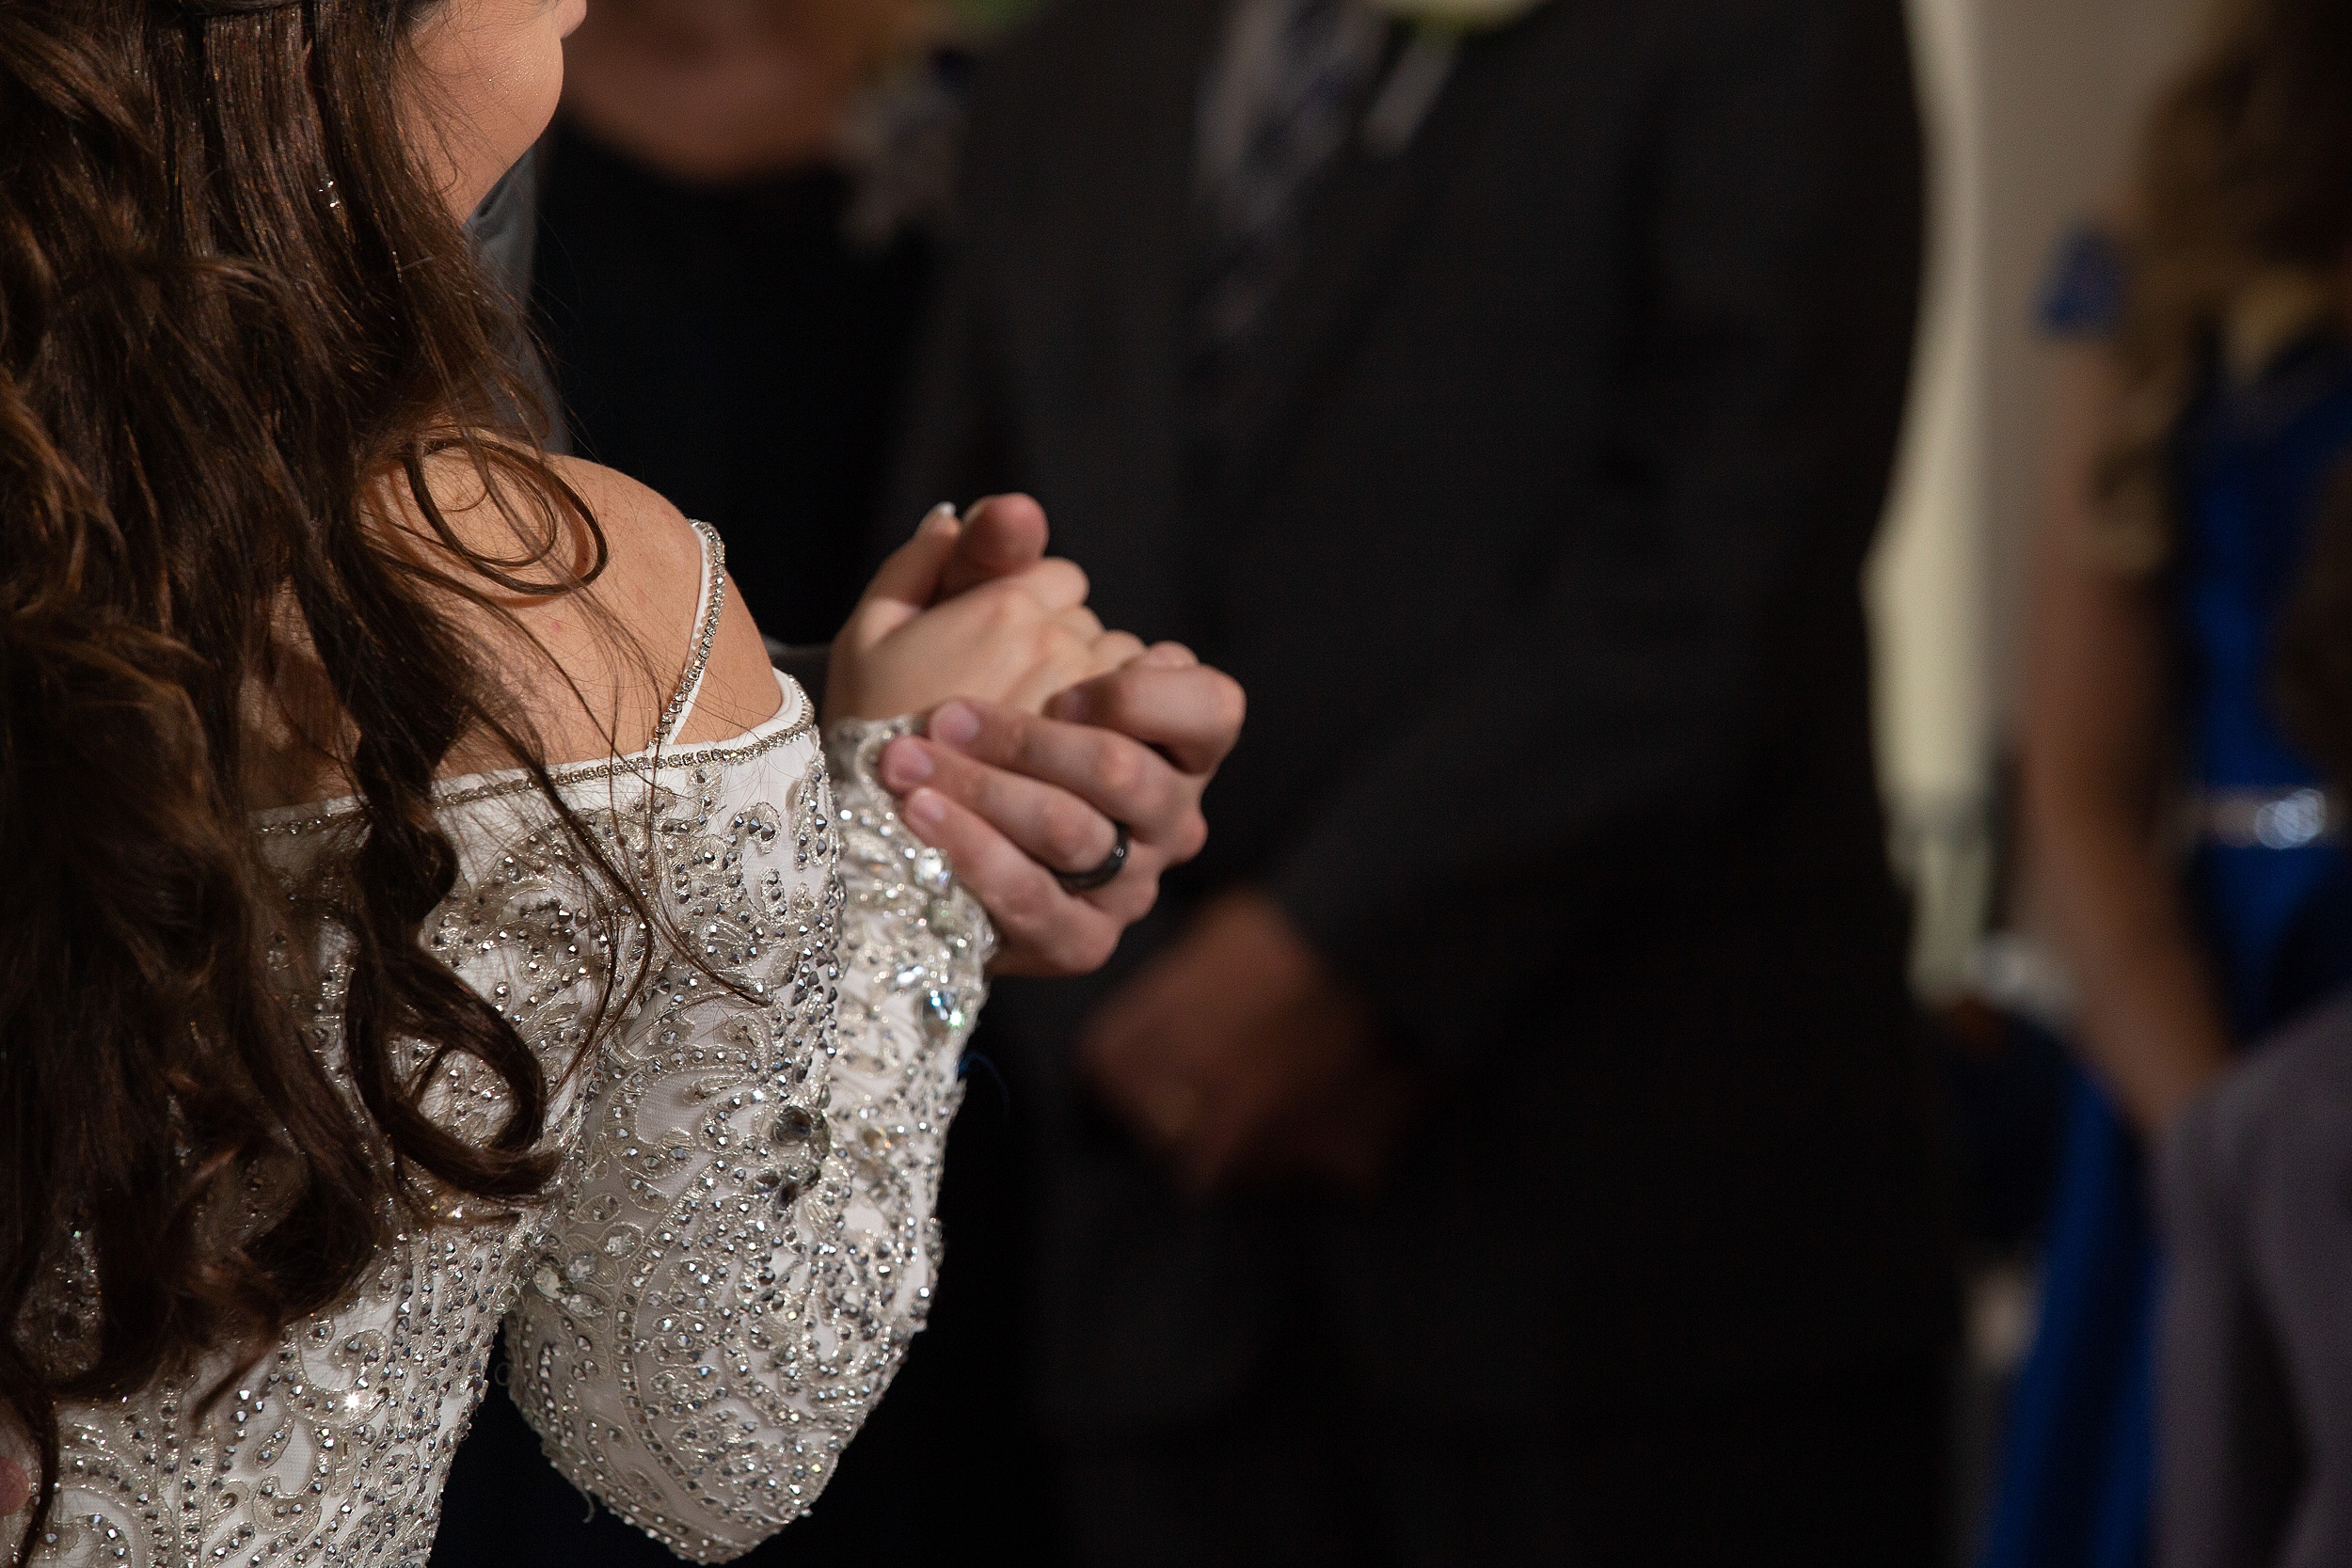 Details of newlyweds holding hands during a wedding reception dance